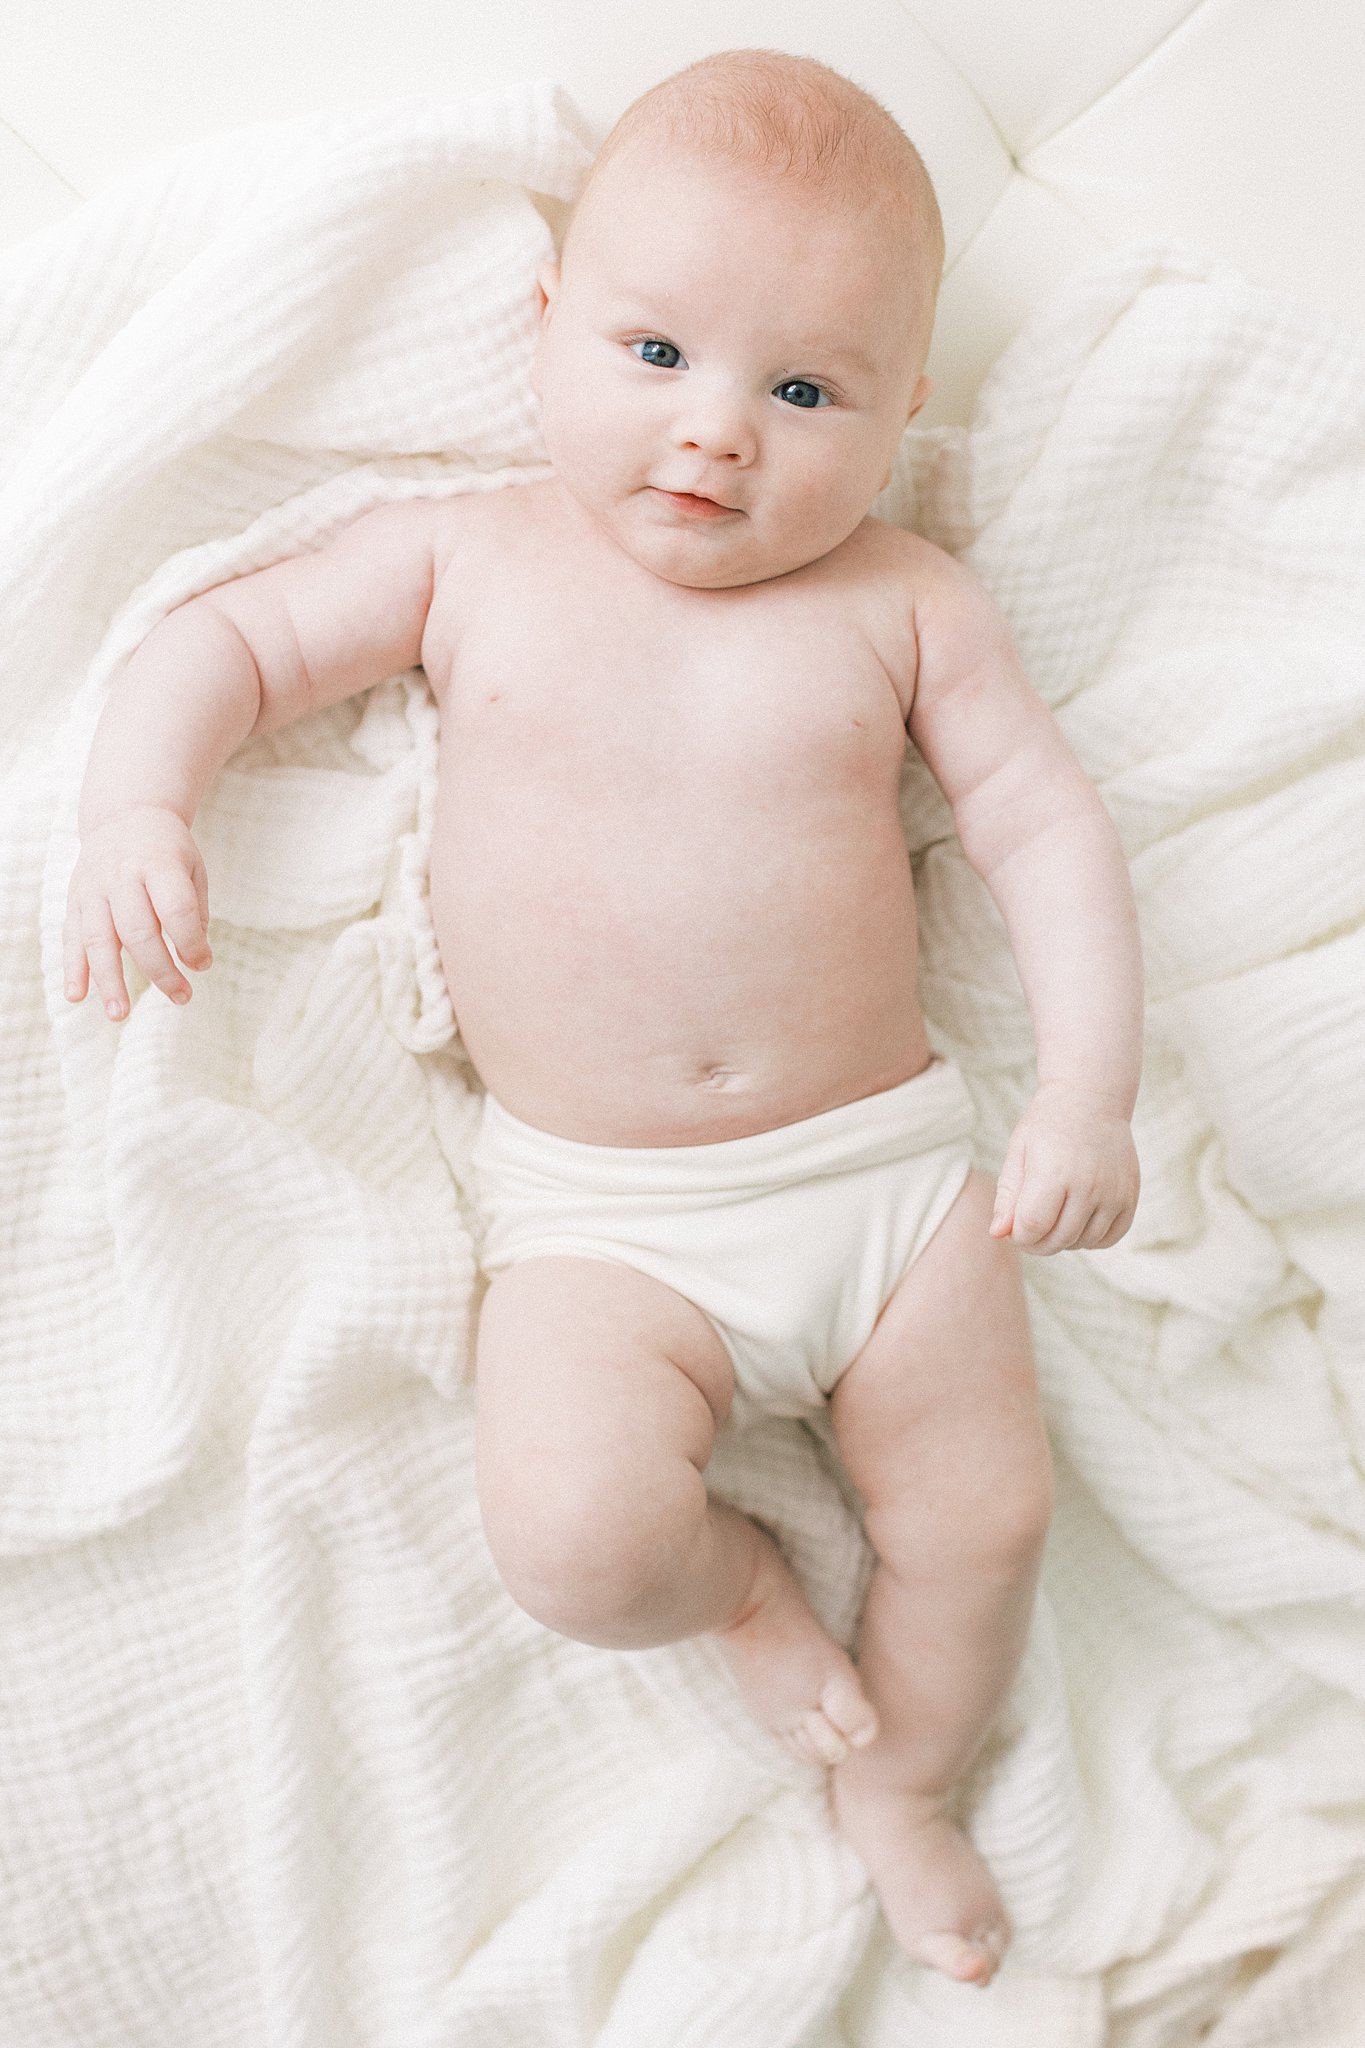 A newborn baby lays in cloth underwear on a white blanket with eyes open